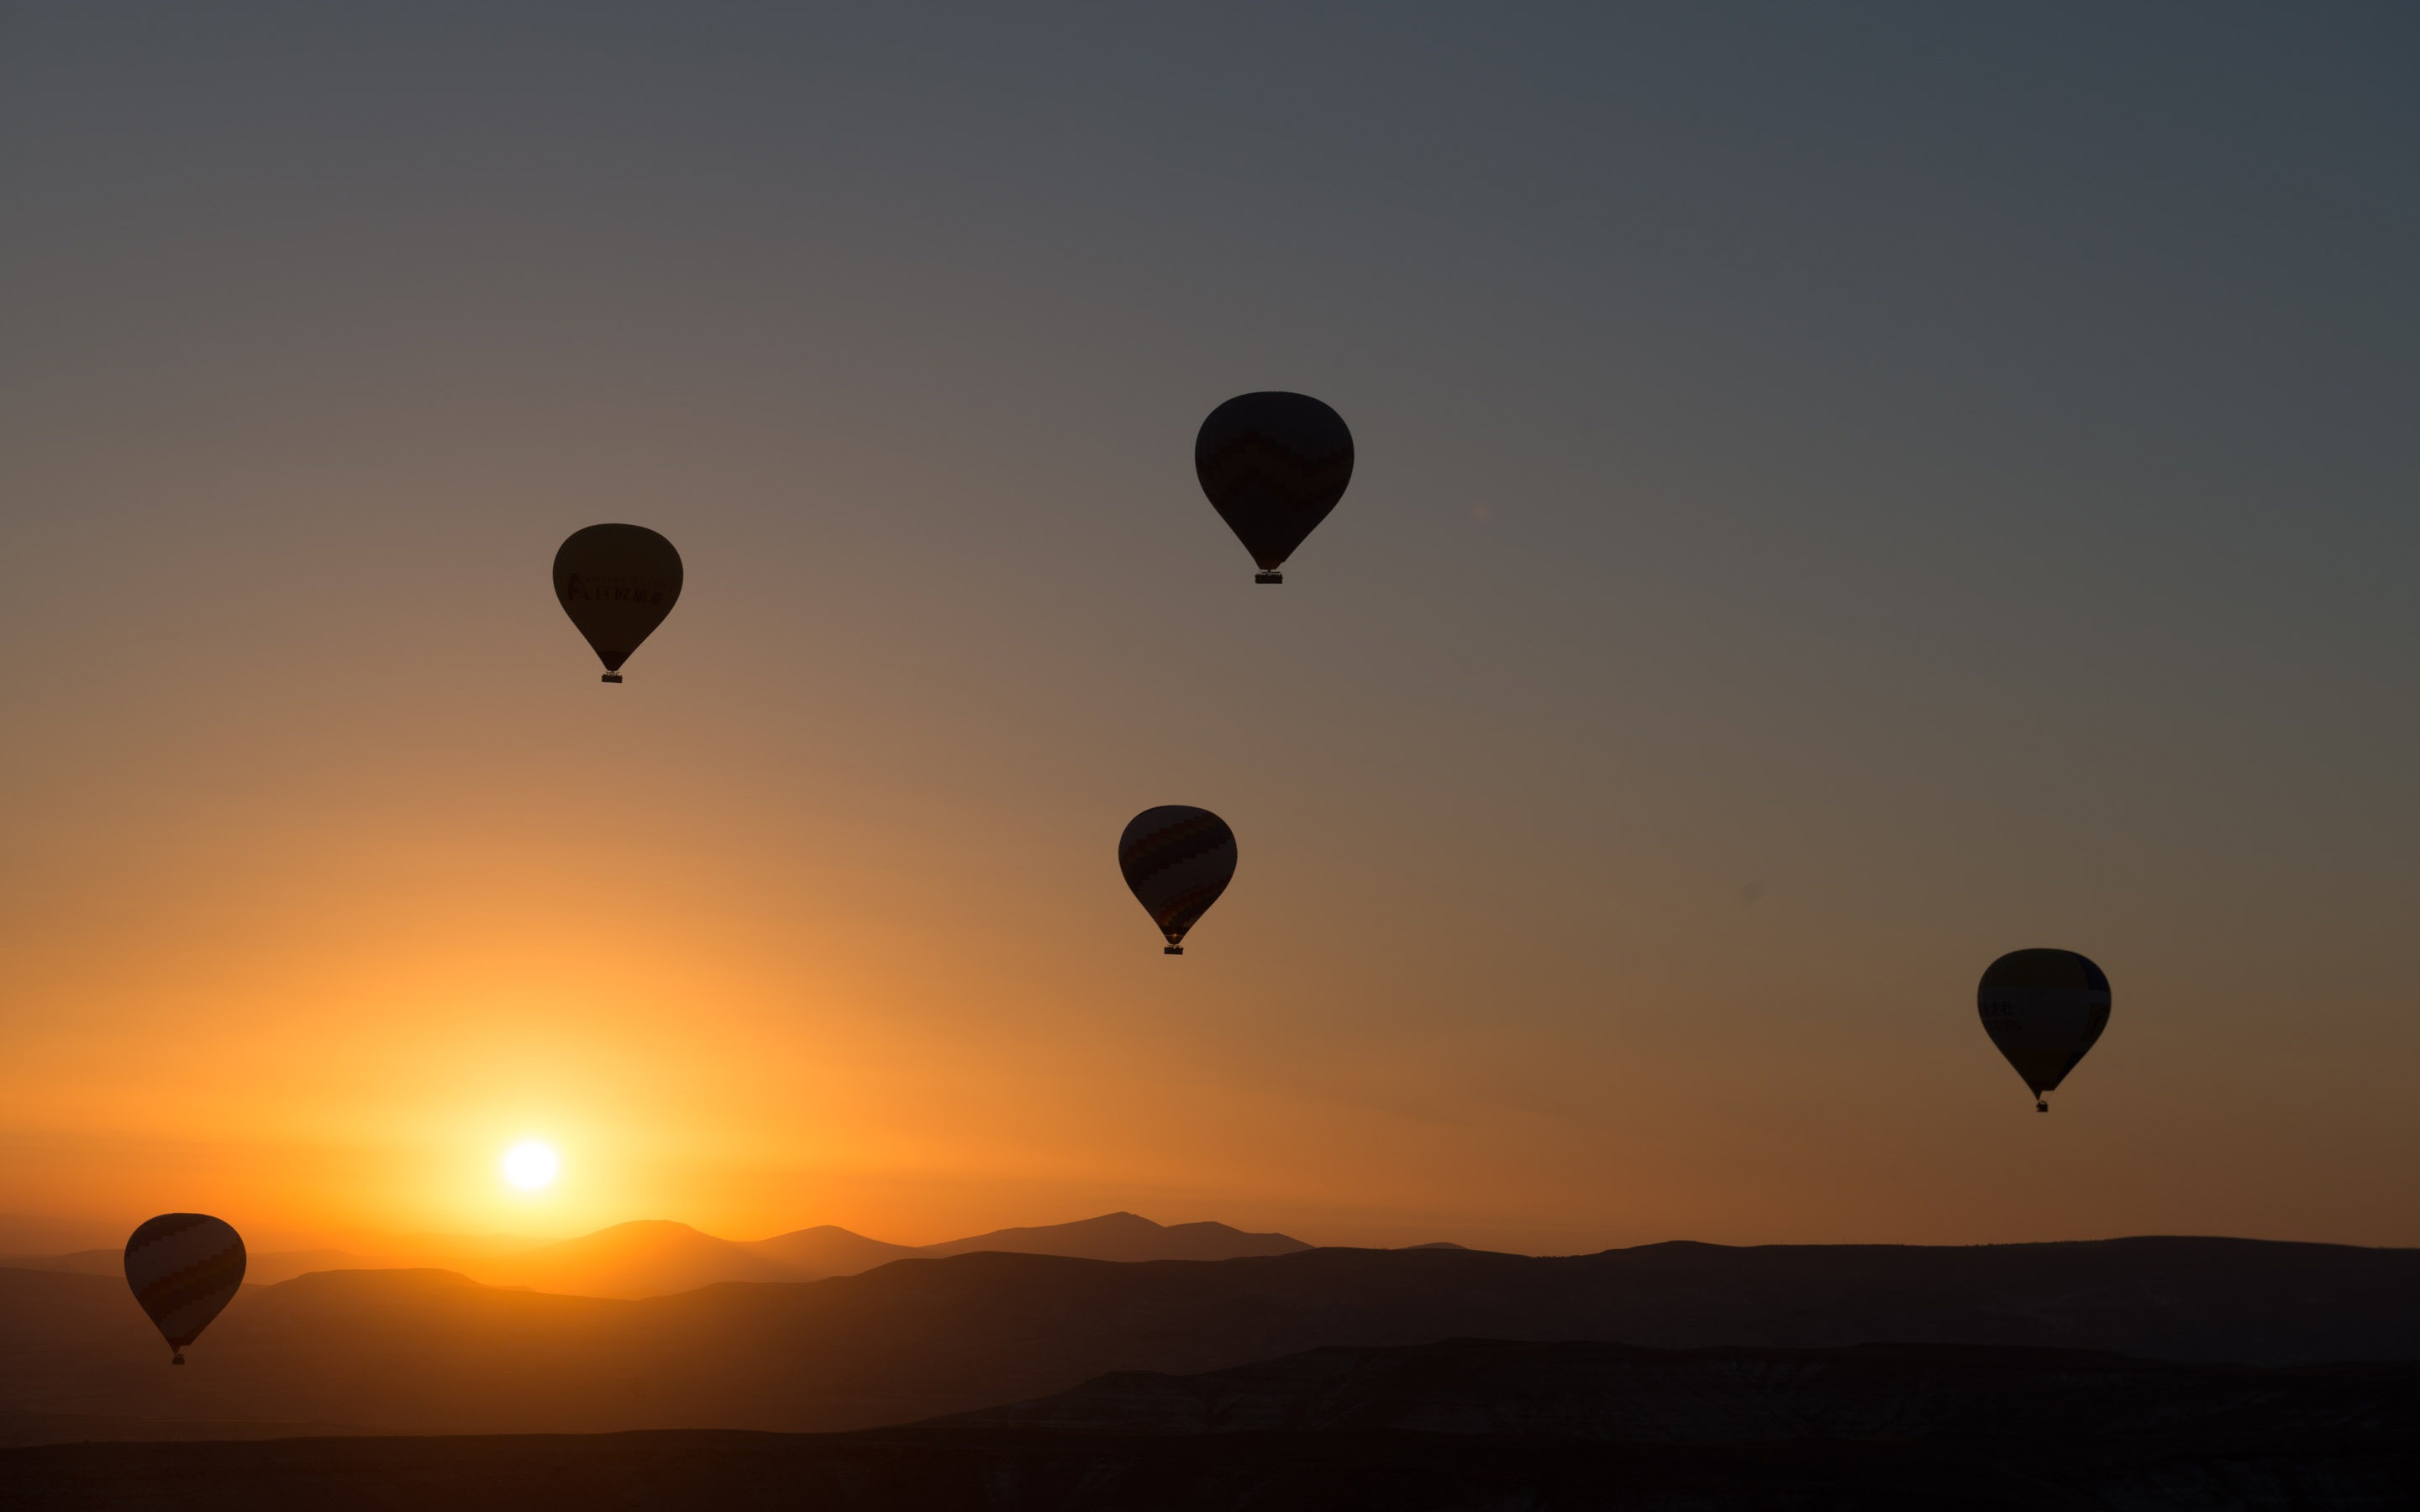 General 2880x1800 hot air balloons sunrise Sun sky mountains hills landscape nature photography